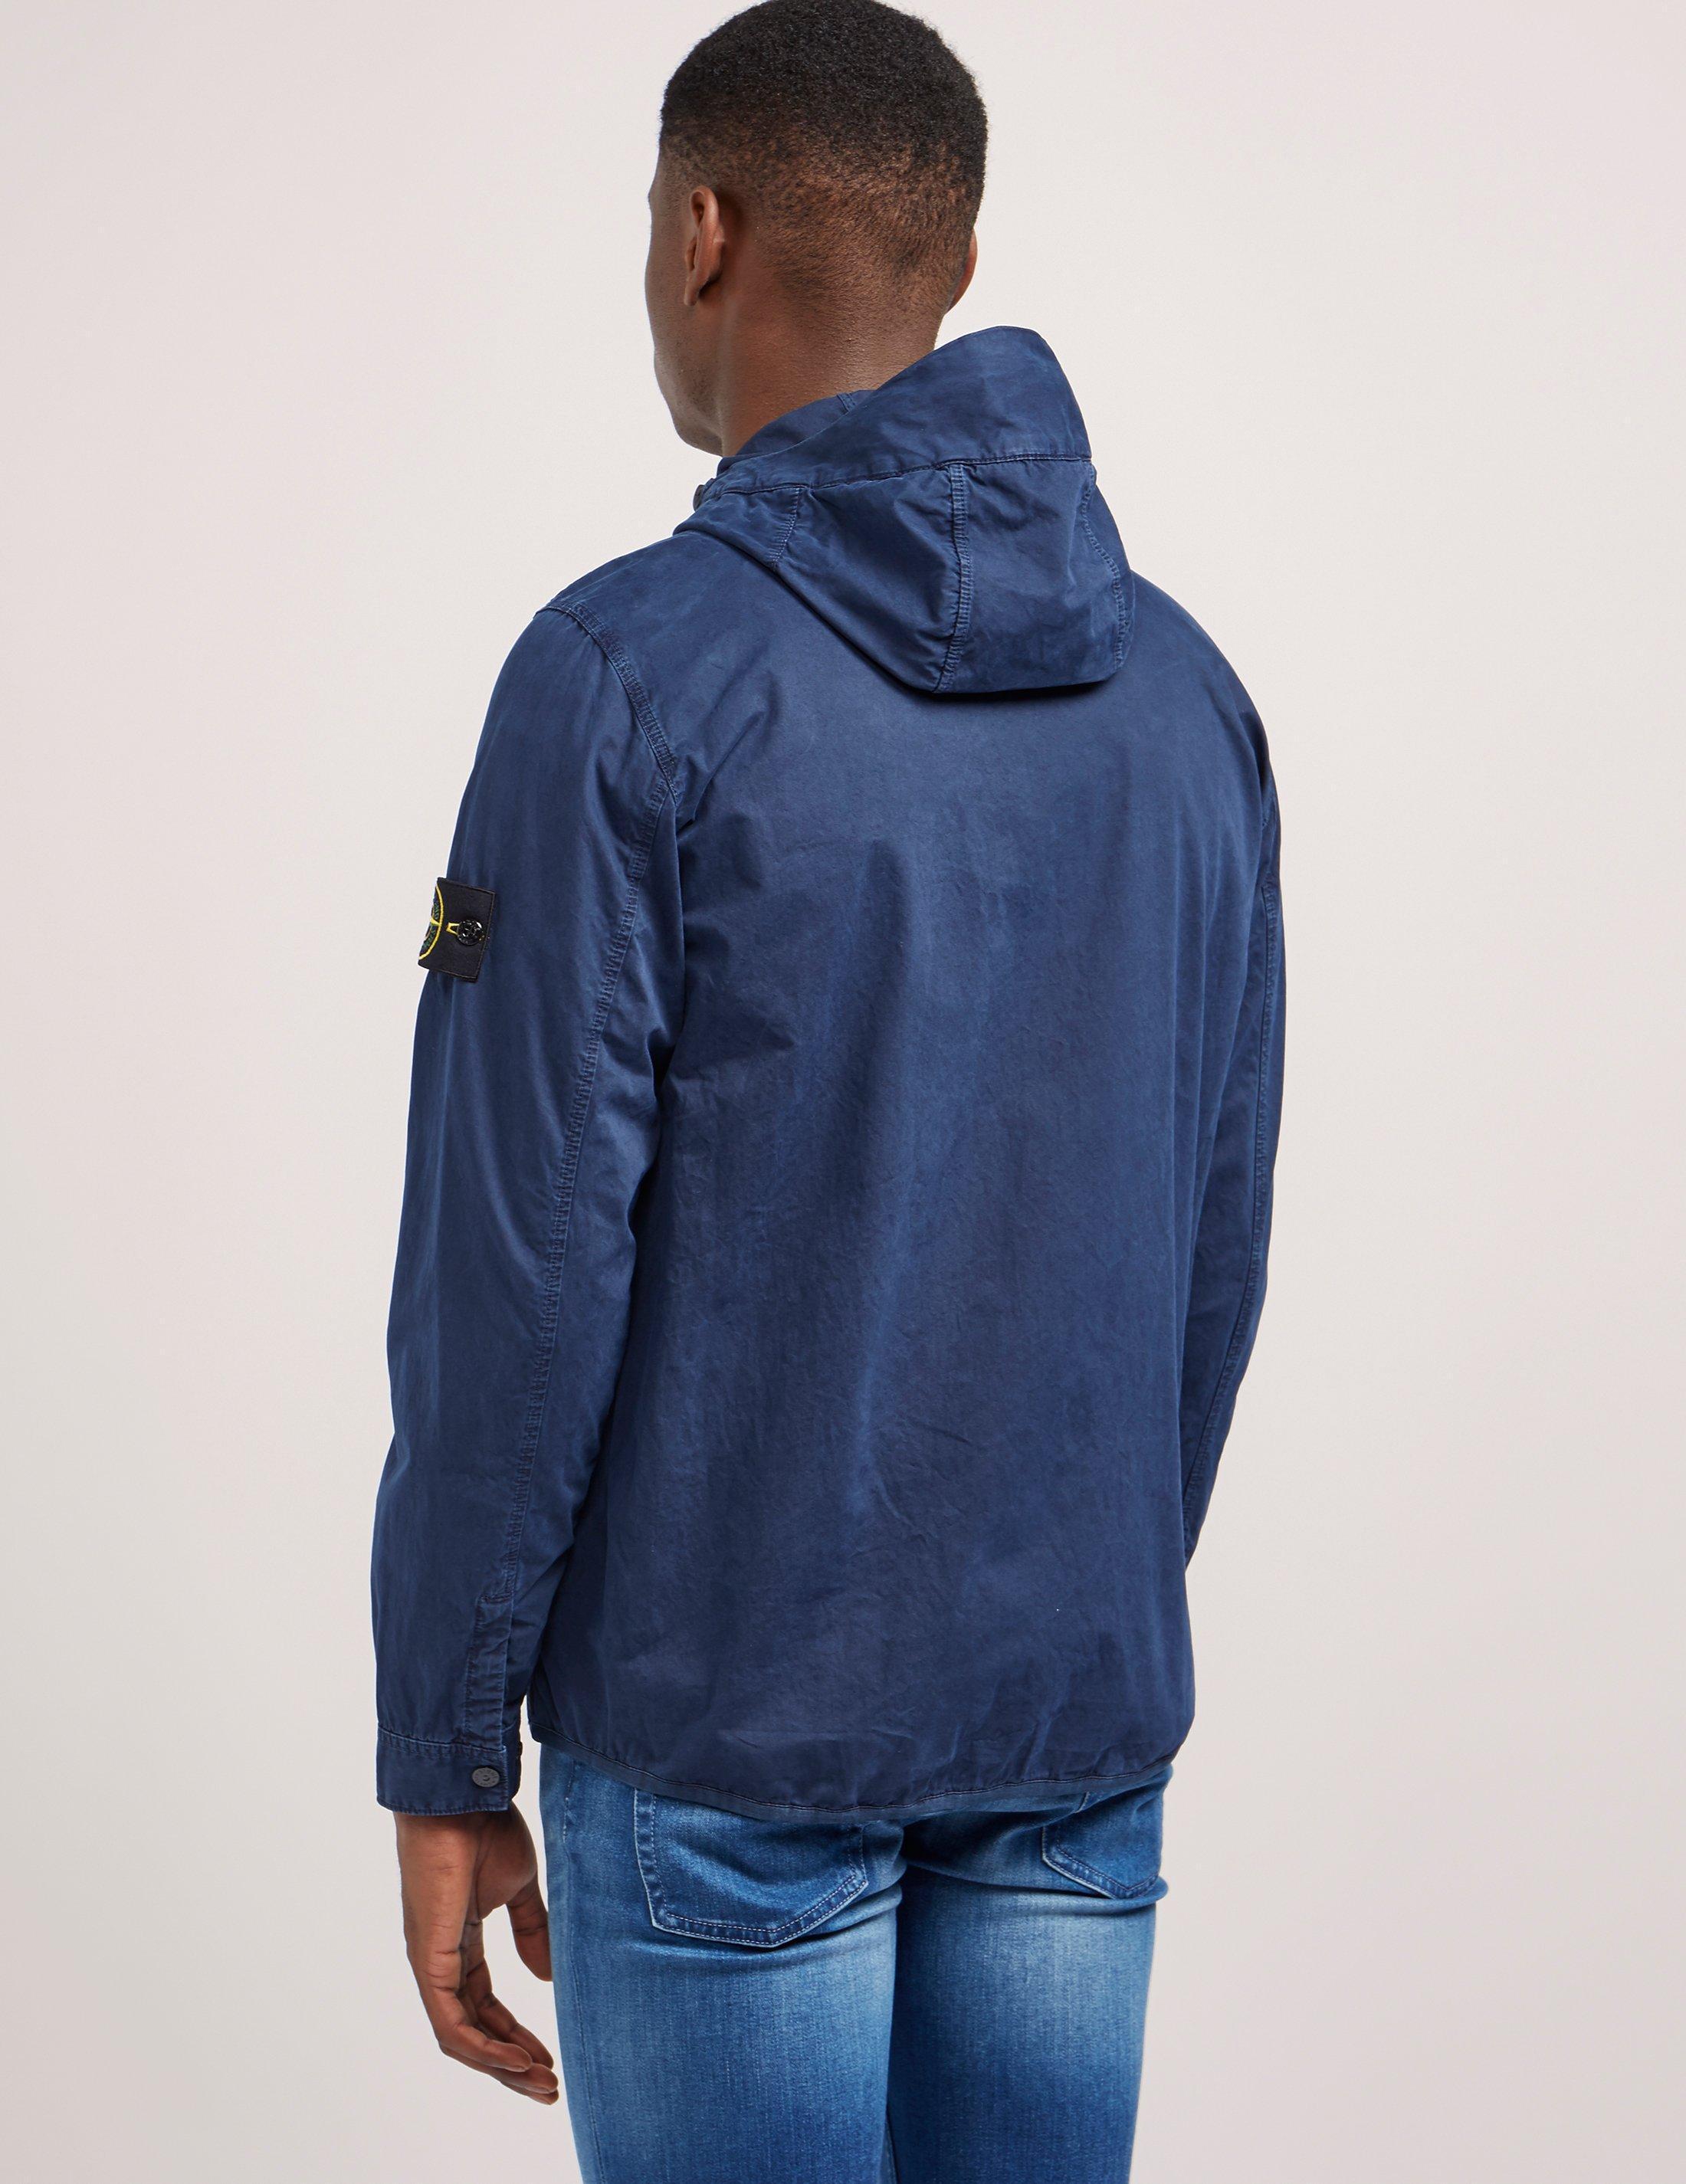 Stone Island Cotton Garment Dyed Hooded Overshirt in Navy (Blue) for Men -  Lyst